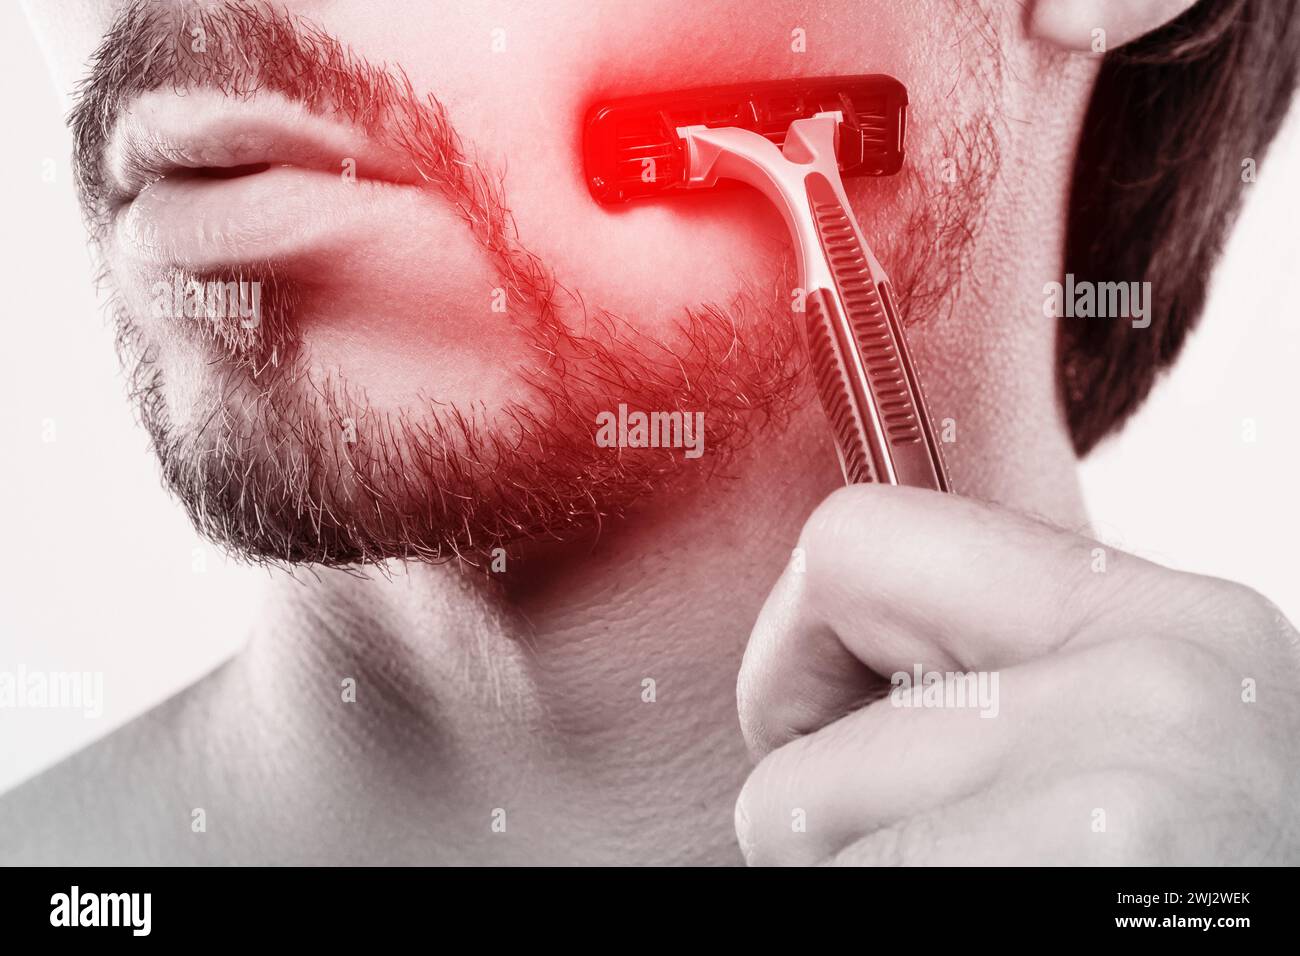 Man with sensitive skin during shaving routine Stock Photo